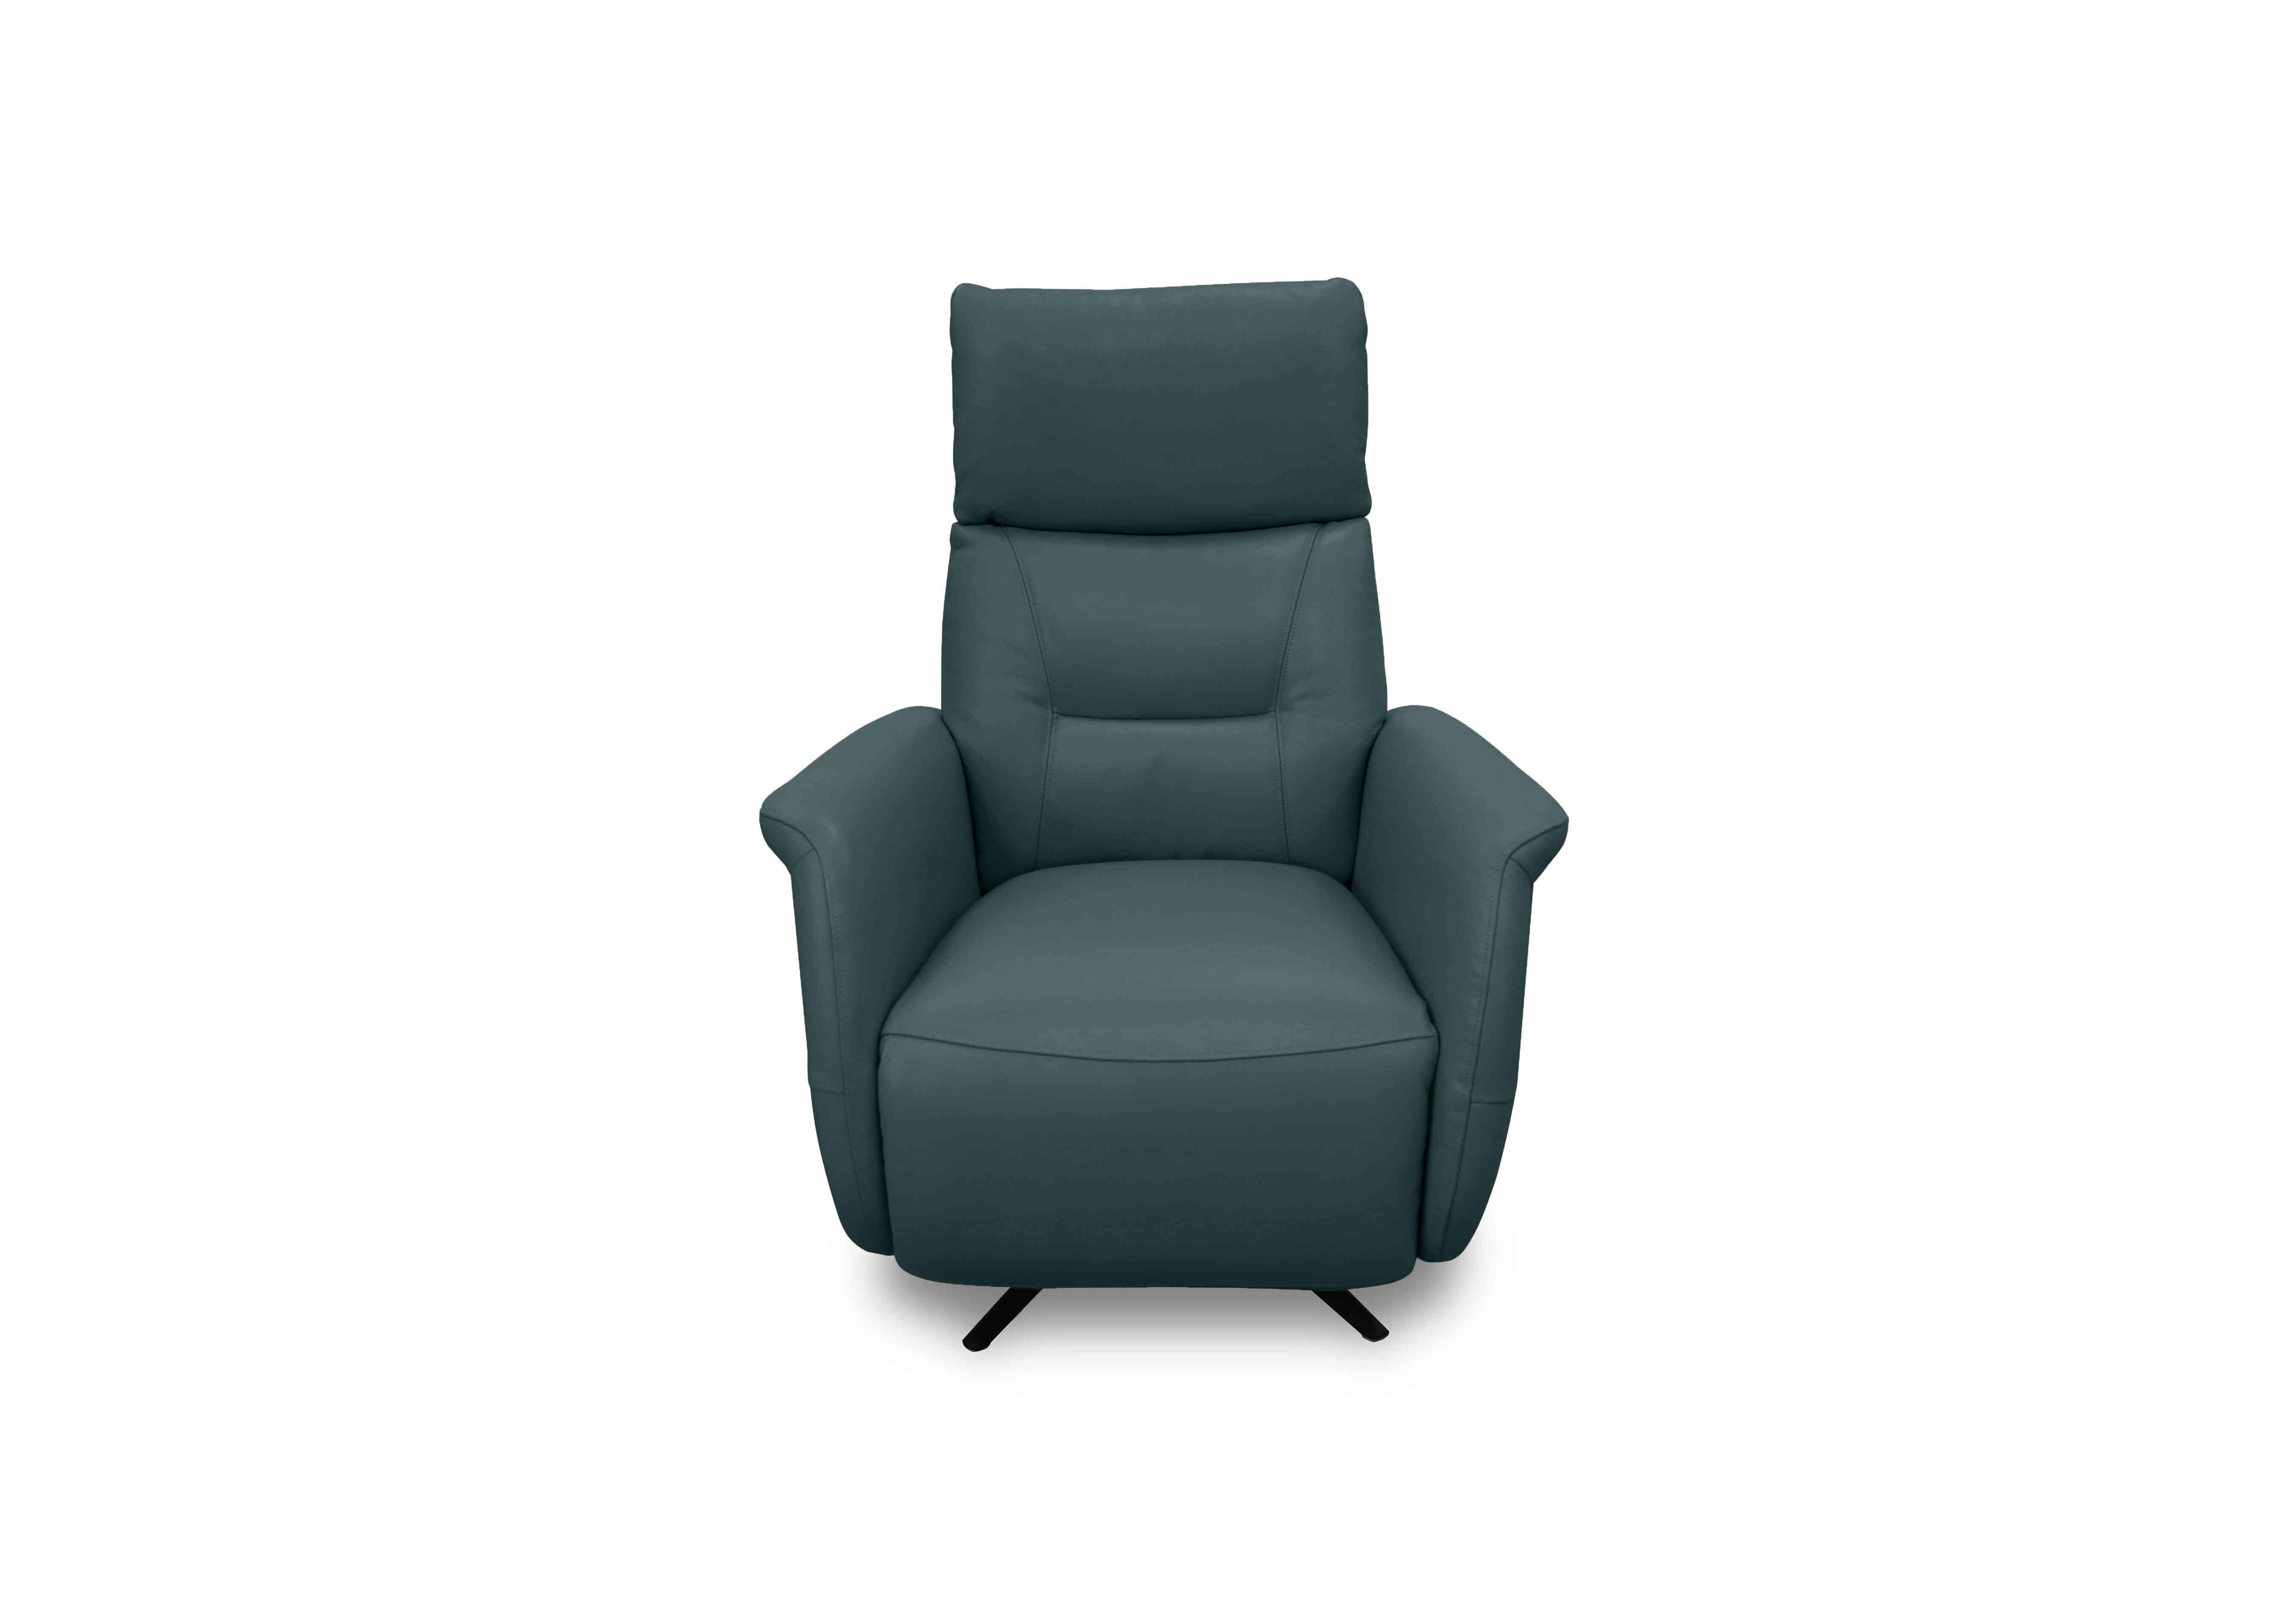 Designer Chair Collection Dusseldorf Leather Power Recliner Swivel Chair in Bv-301e Lake Green on Furniture Village